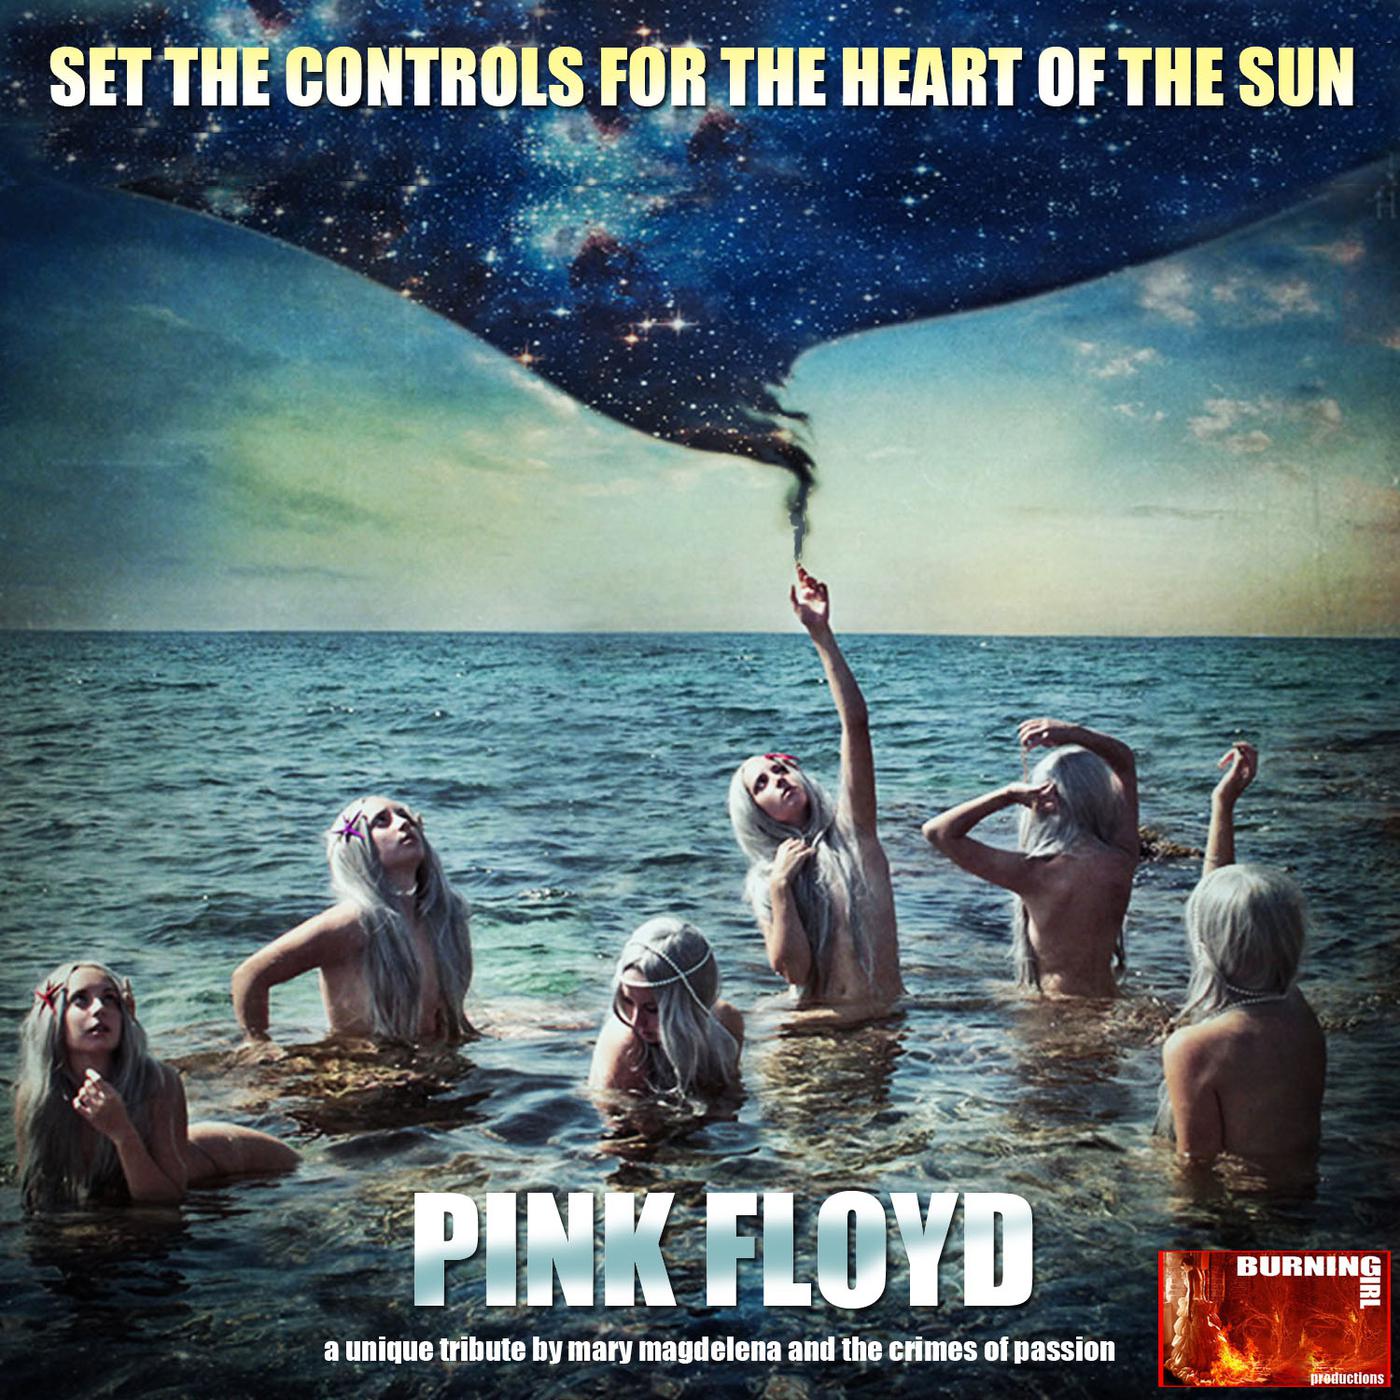 Set the Controls – A Unique Tribute to Pink Floyd